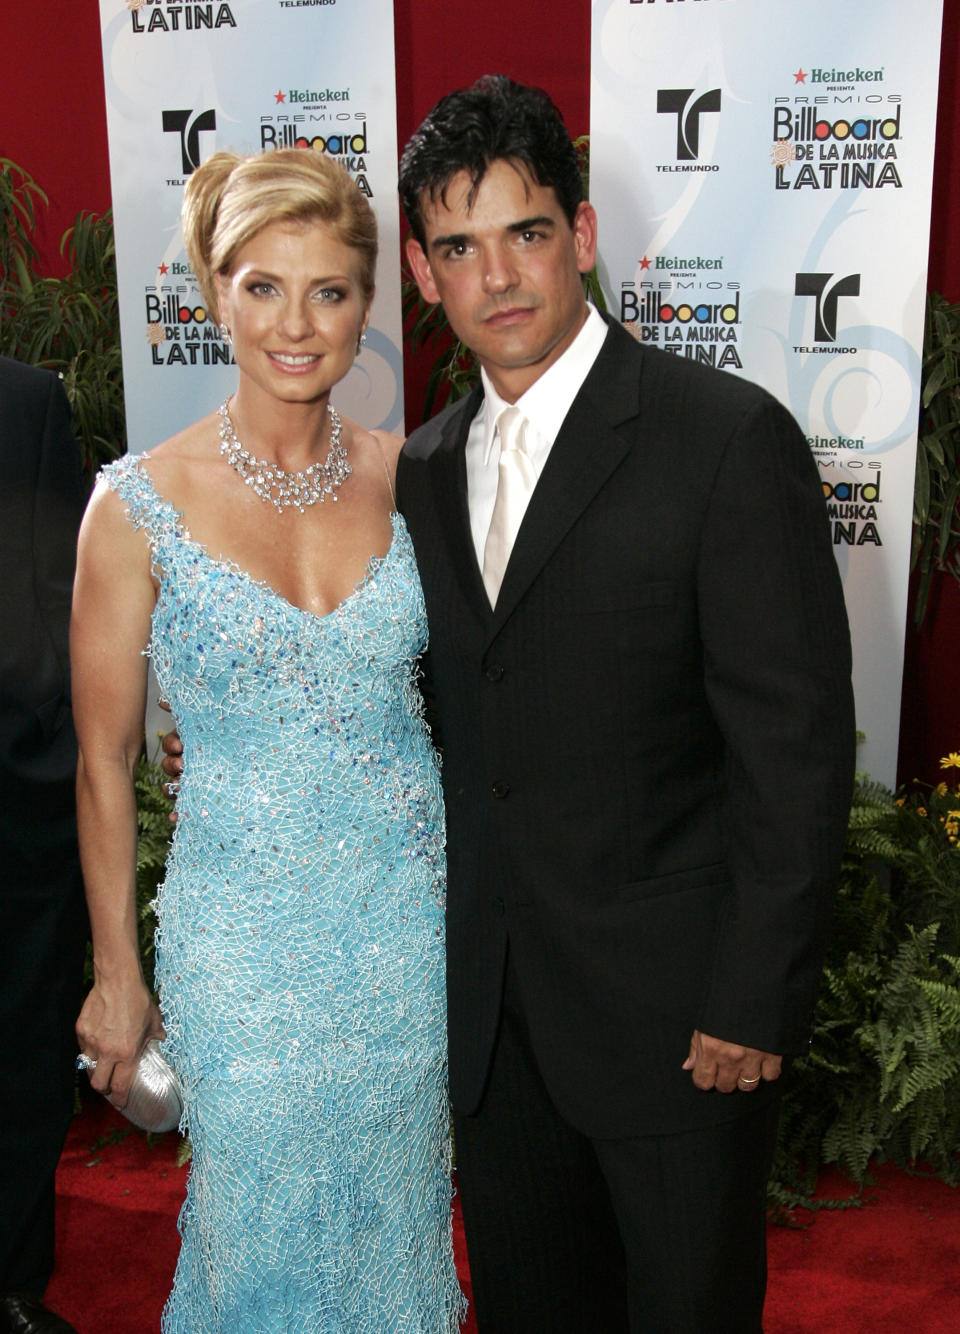 Jose Angel Llamas and guest during 2006 Billboard Latin Music Conference & Awards - Arrivals at Seminole Hard Rock Hotel and Casino in Hollywood, Florida, United States. (Photo by John Parra/FilmMagic for Morgan Renee Entertainment)